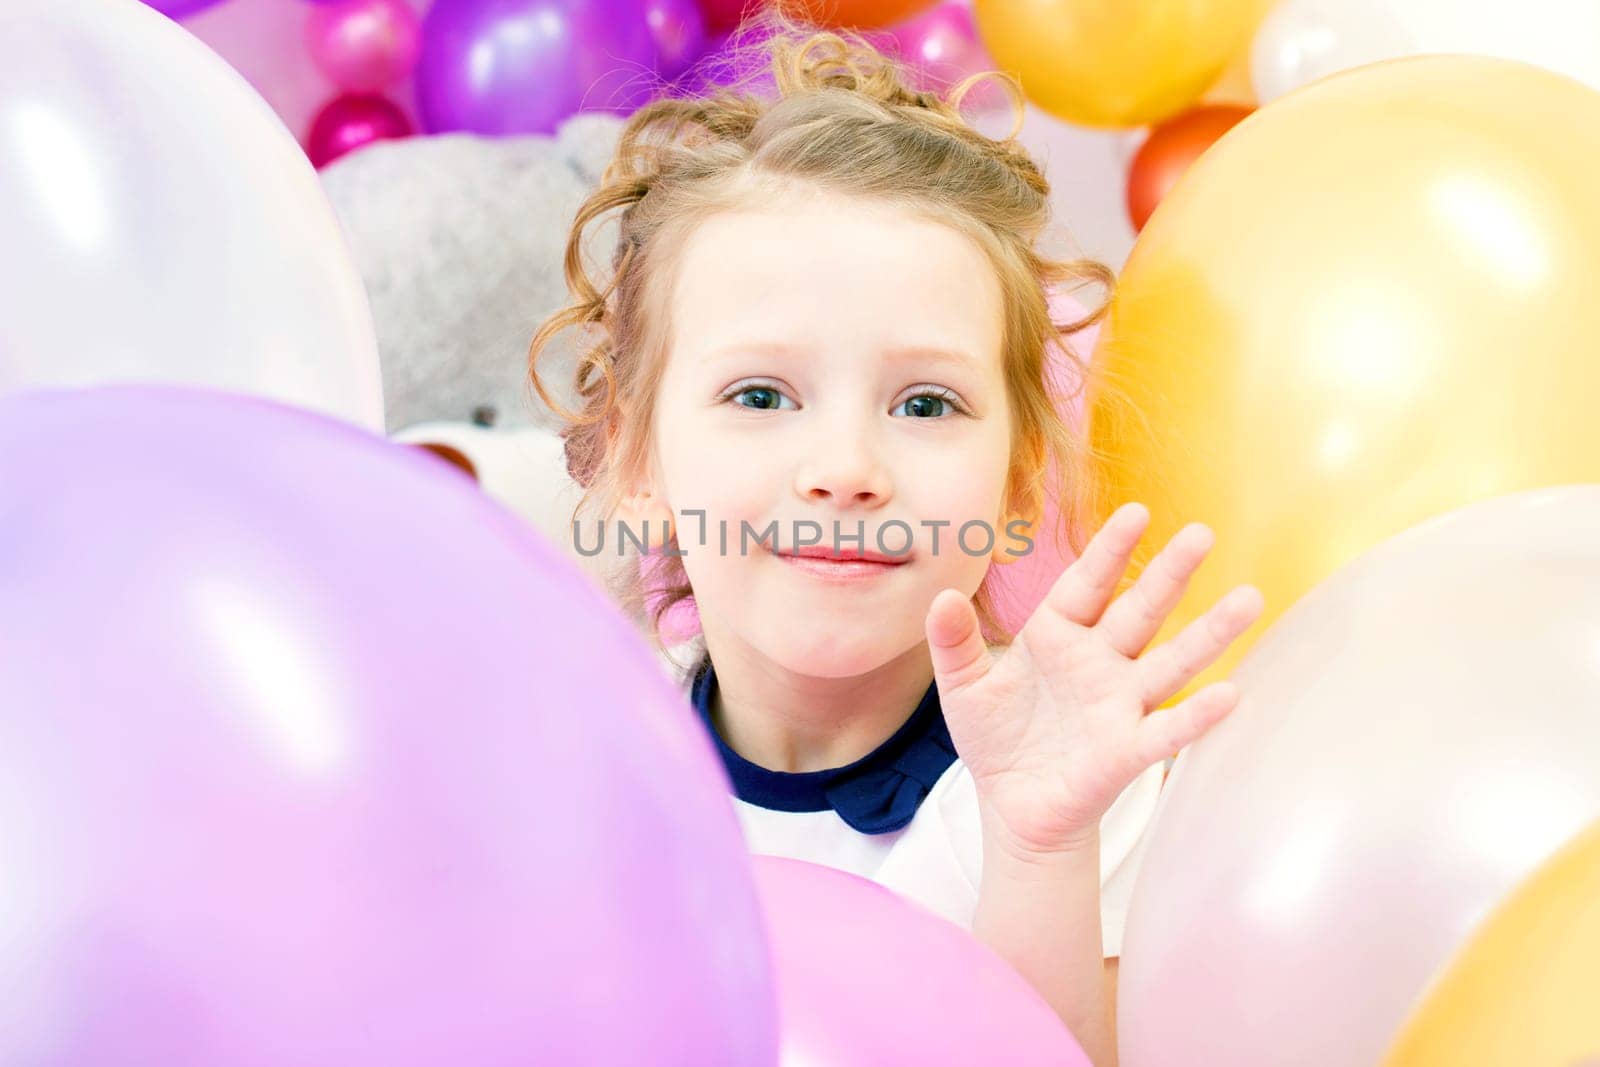 Cheerful girl posing with colorful balloons, close-up